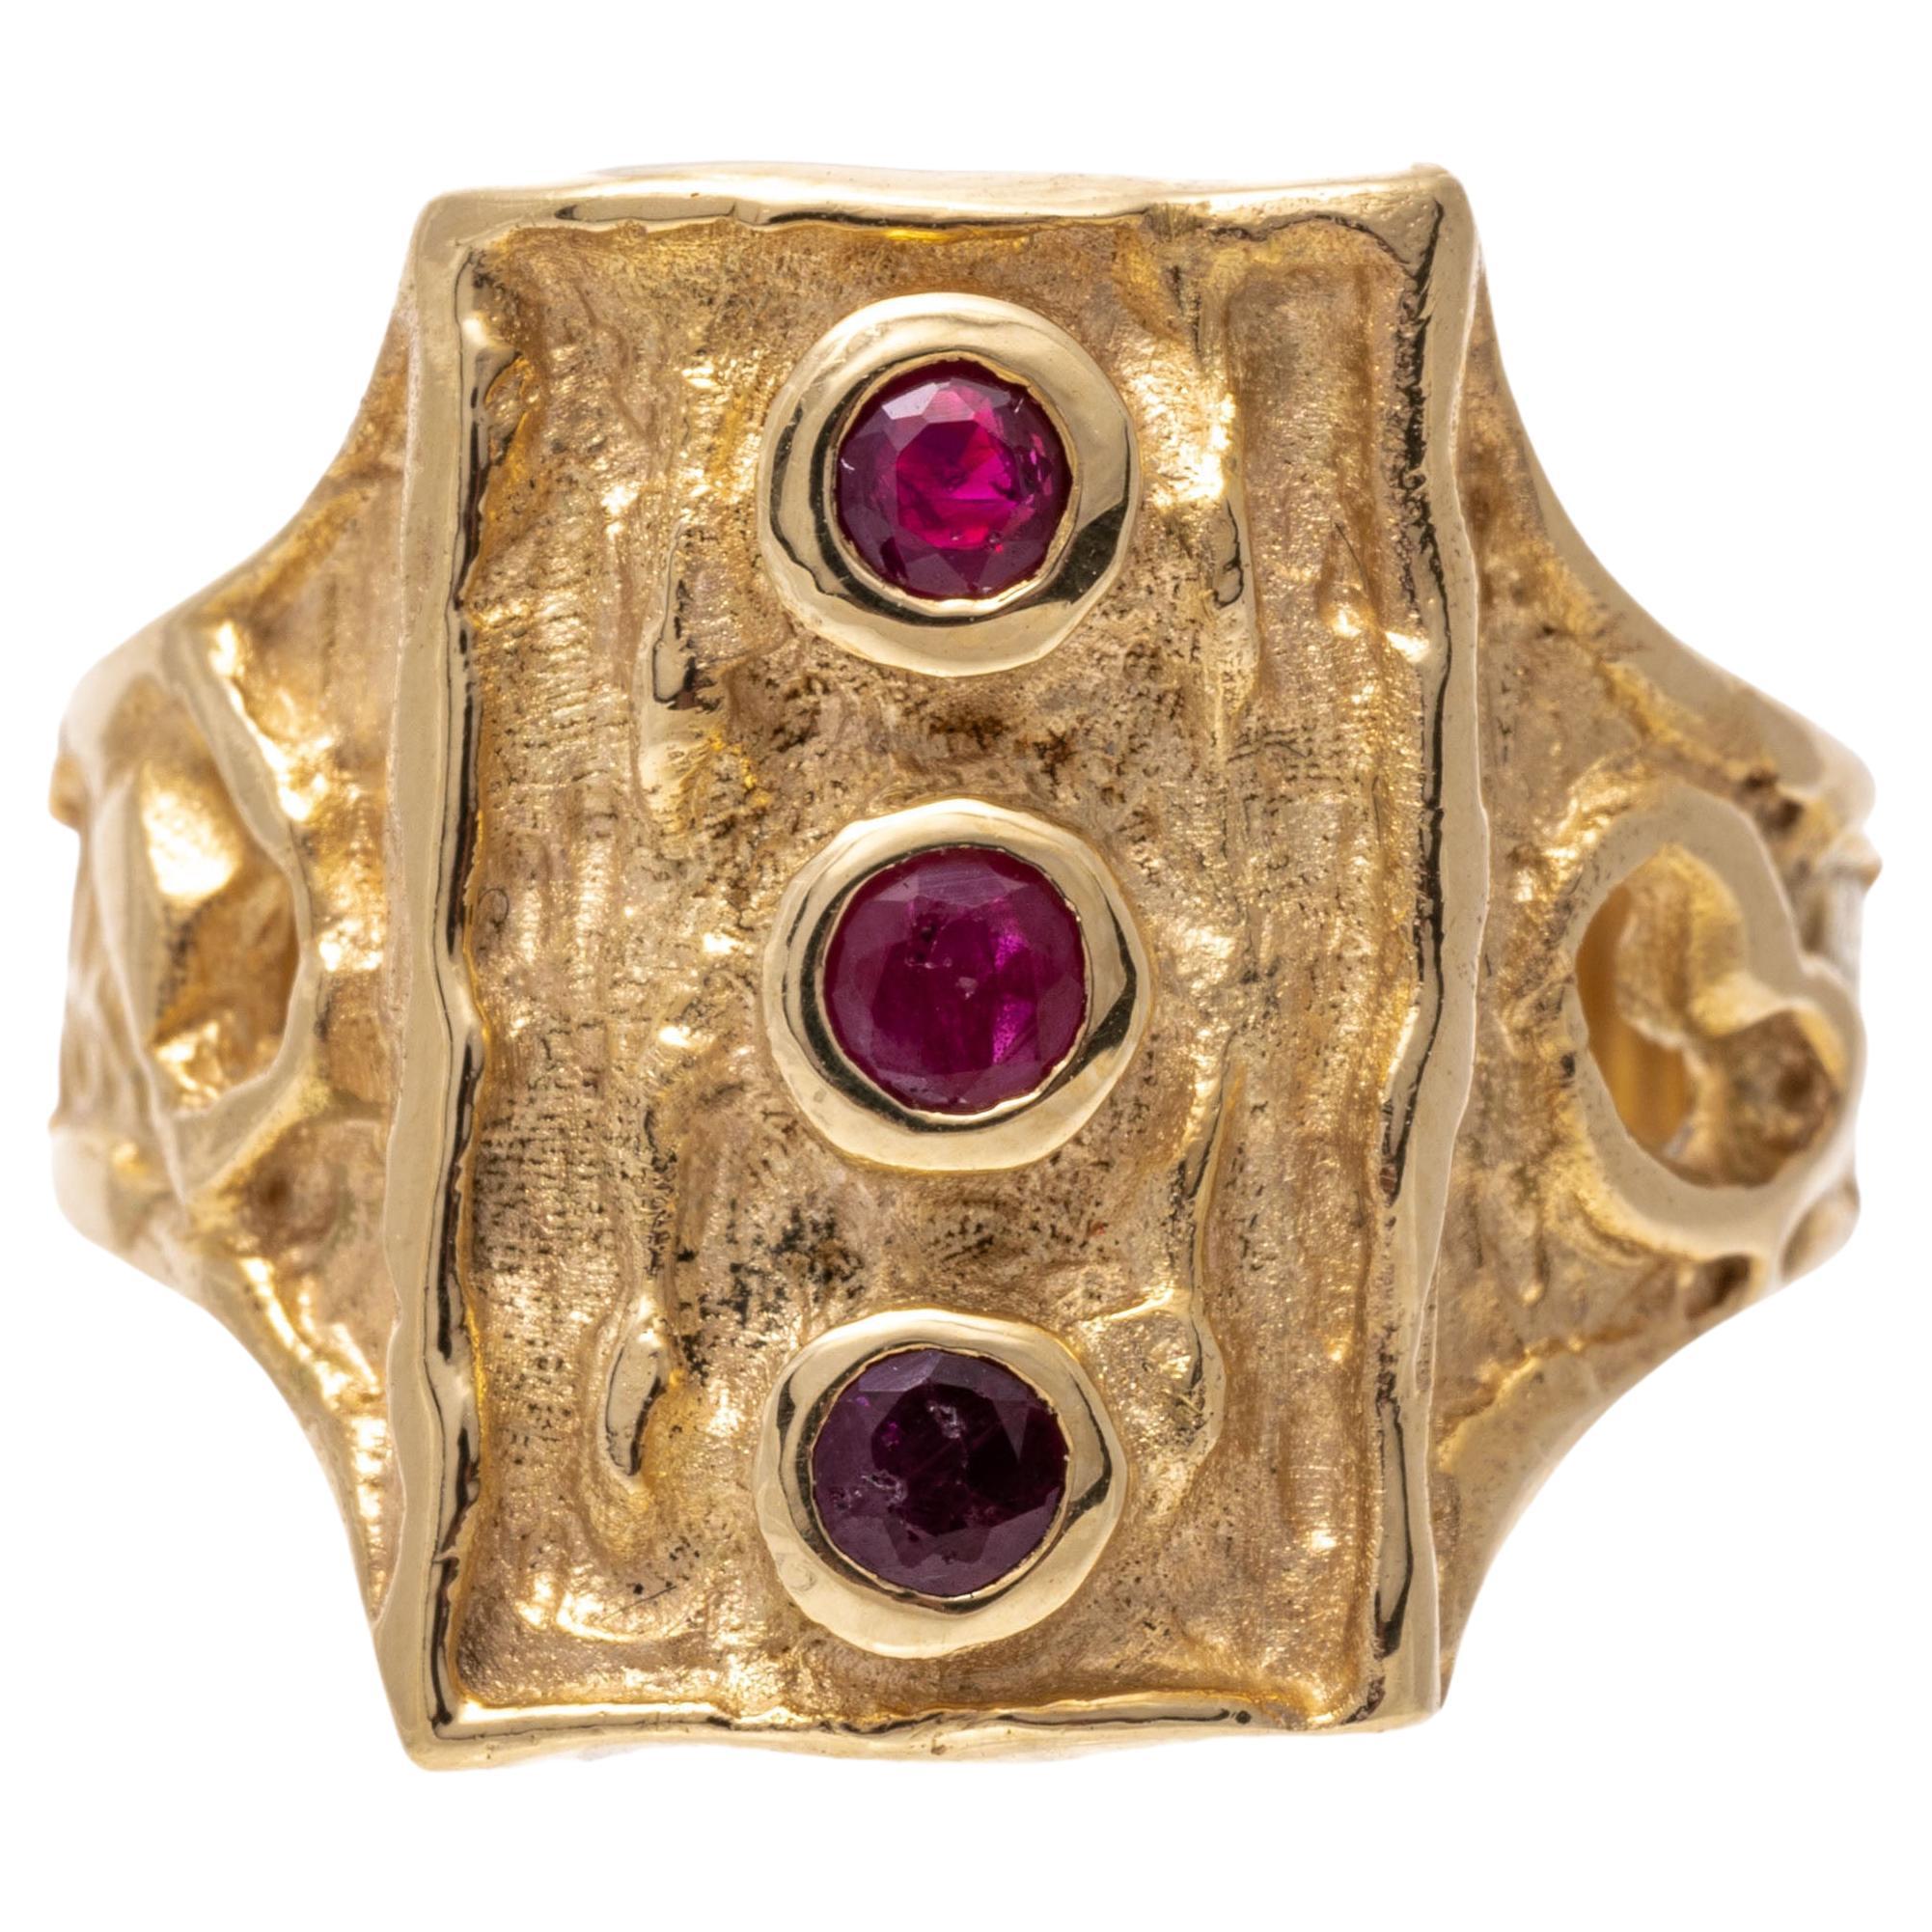 14k Gold Free Form Rectangular Ruby Set Ring With Melted Patterning, Size 7.75 For Sale